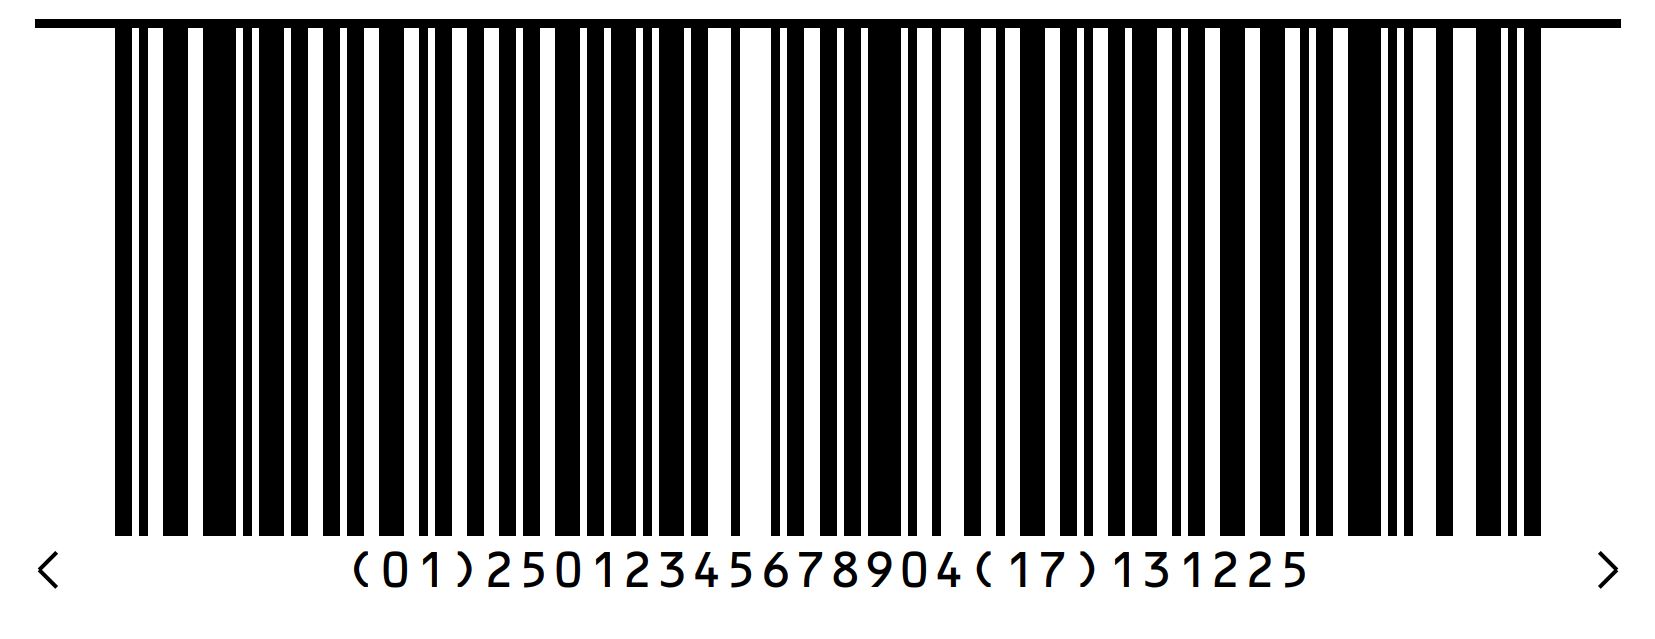 GS1-128 barcode image